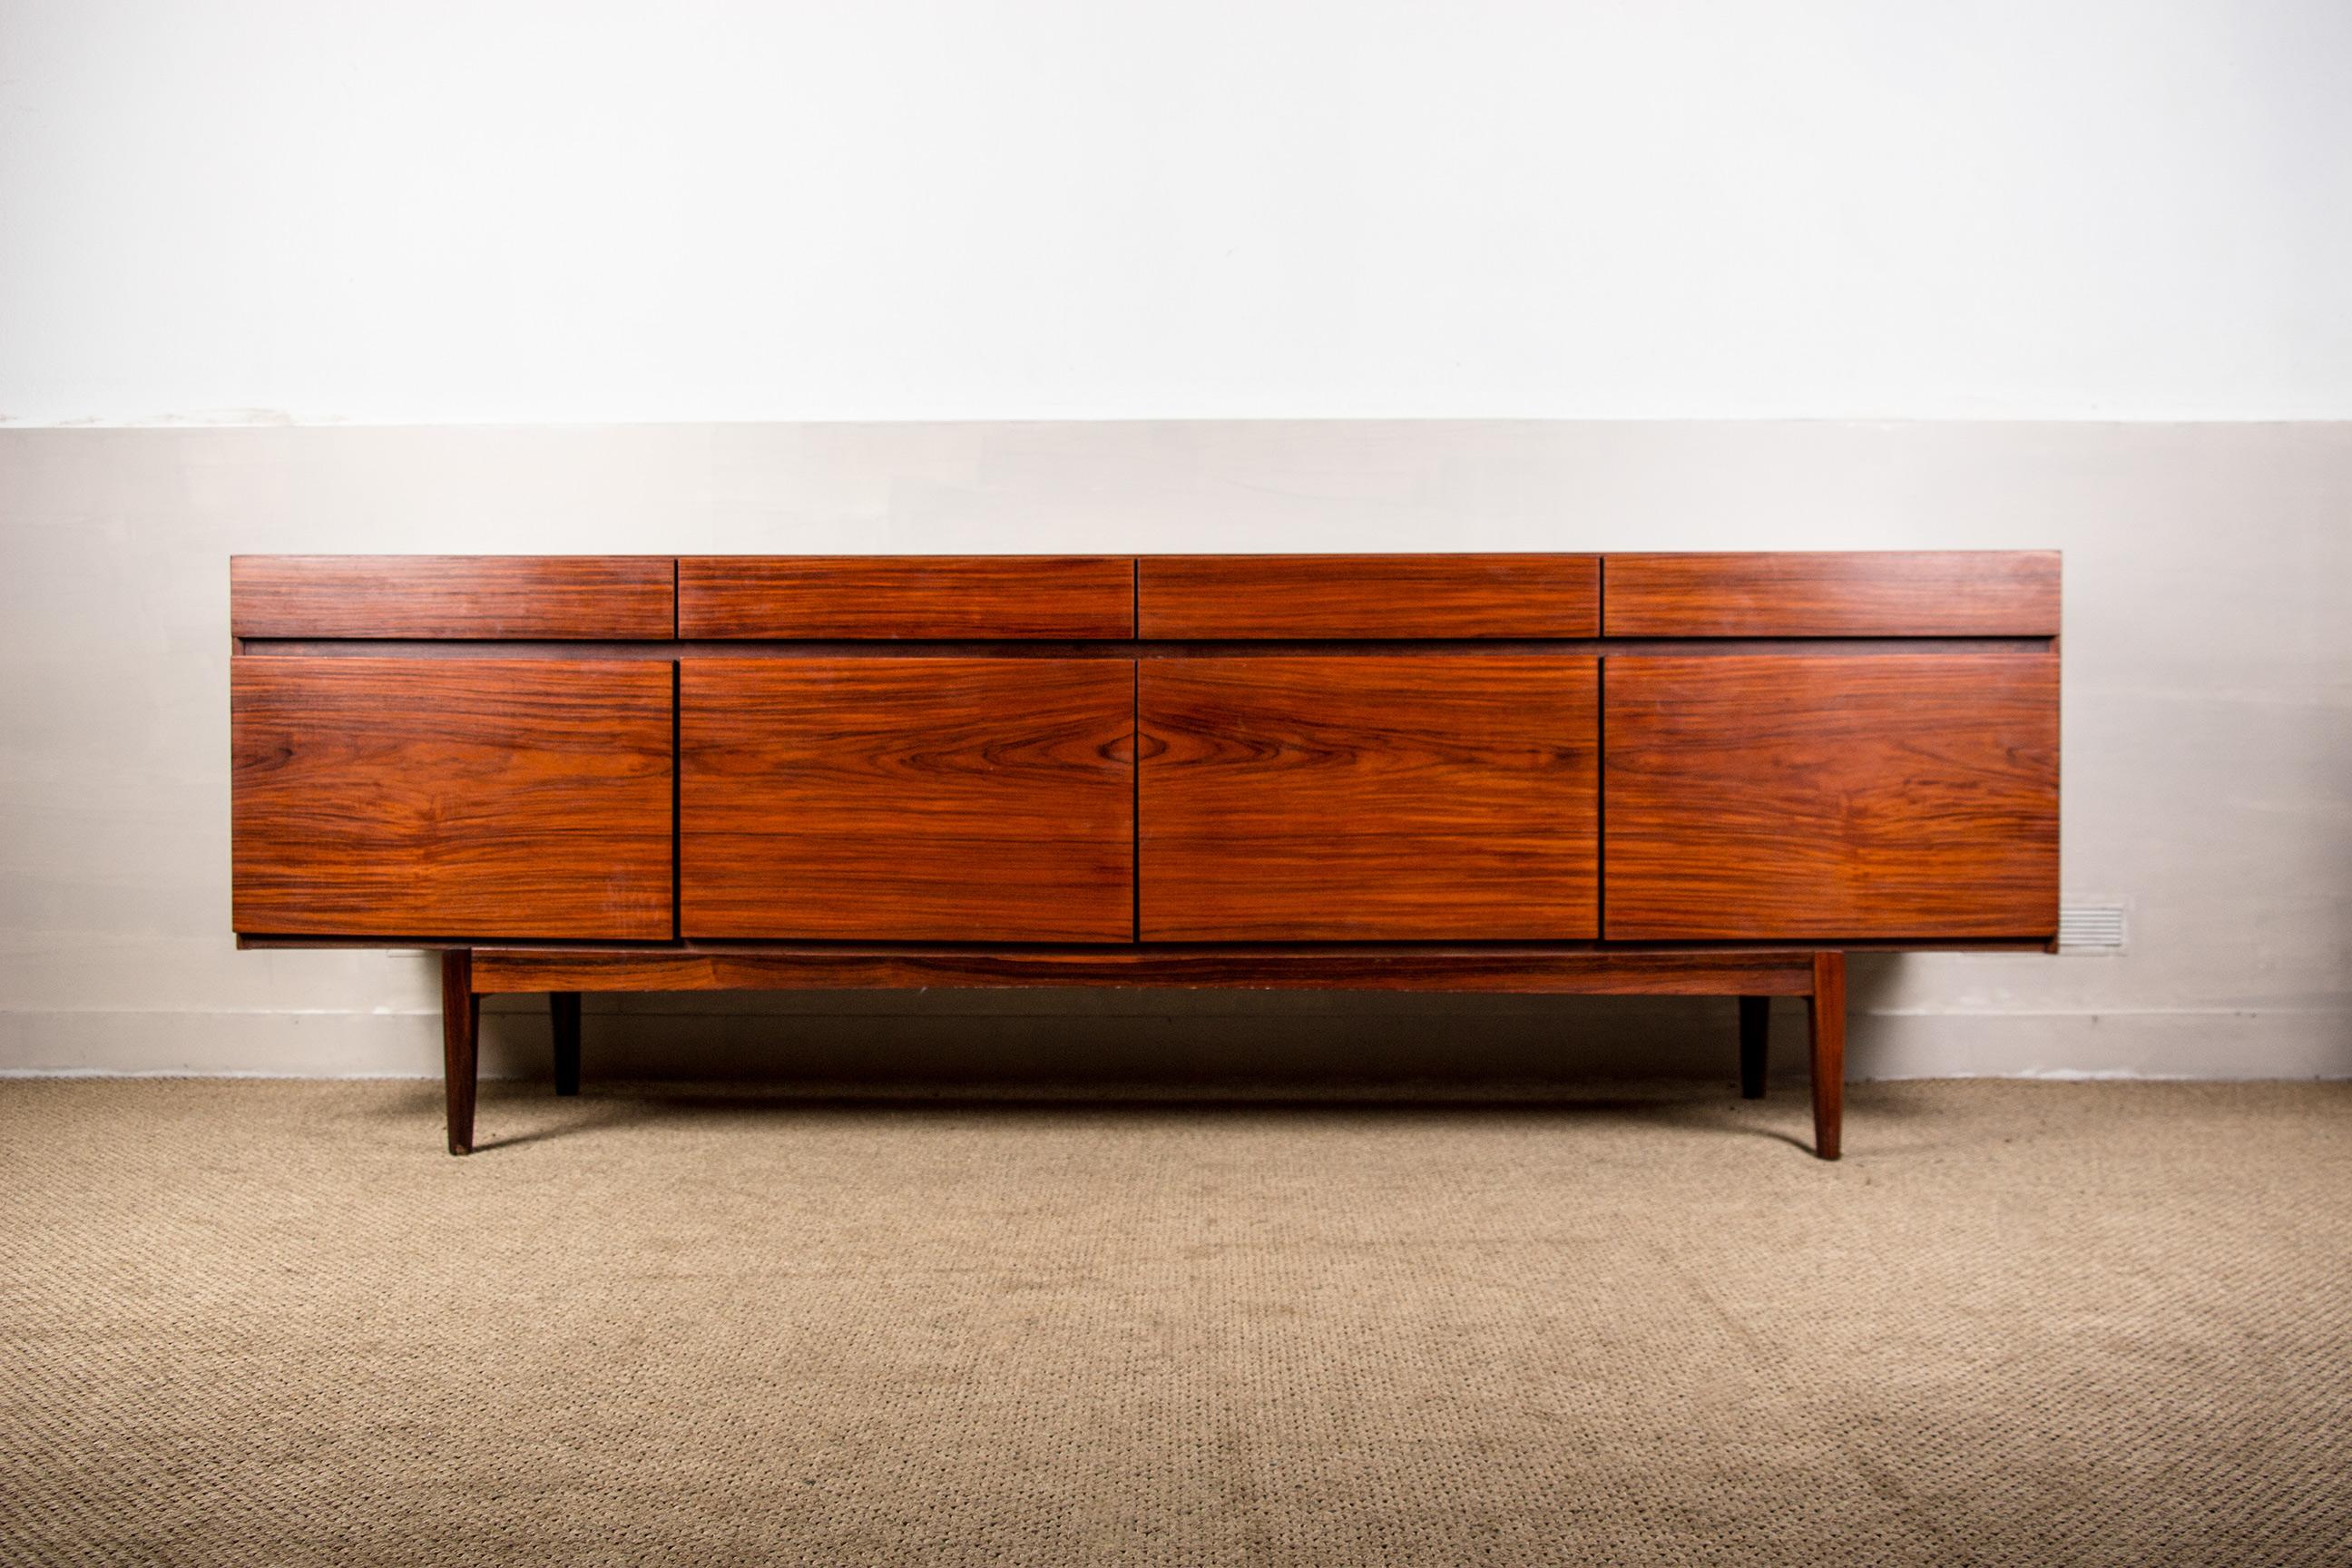 Exceptional large Scandinavian sideboard, furniture with a sober and very elegant Modernist Design, On the upper part 4 large drawers, on the lower part 4 doors, 3 open on a shelf and the one on the left opens on 5 interior drawers. Large storage